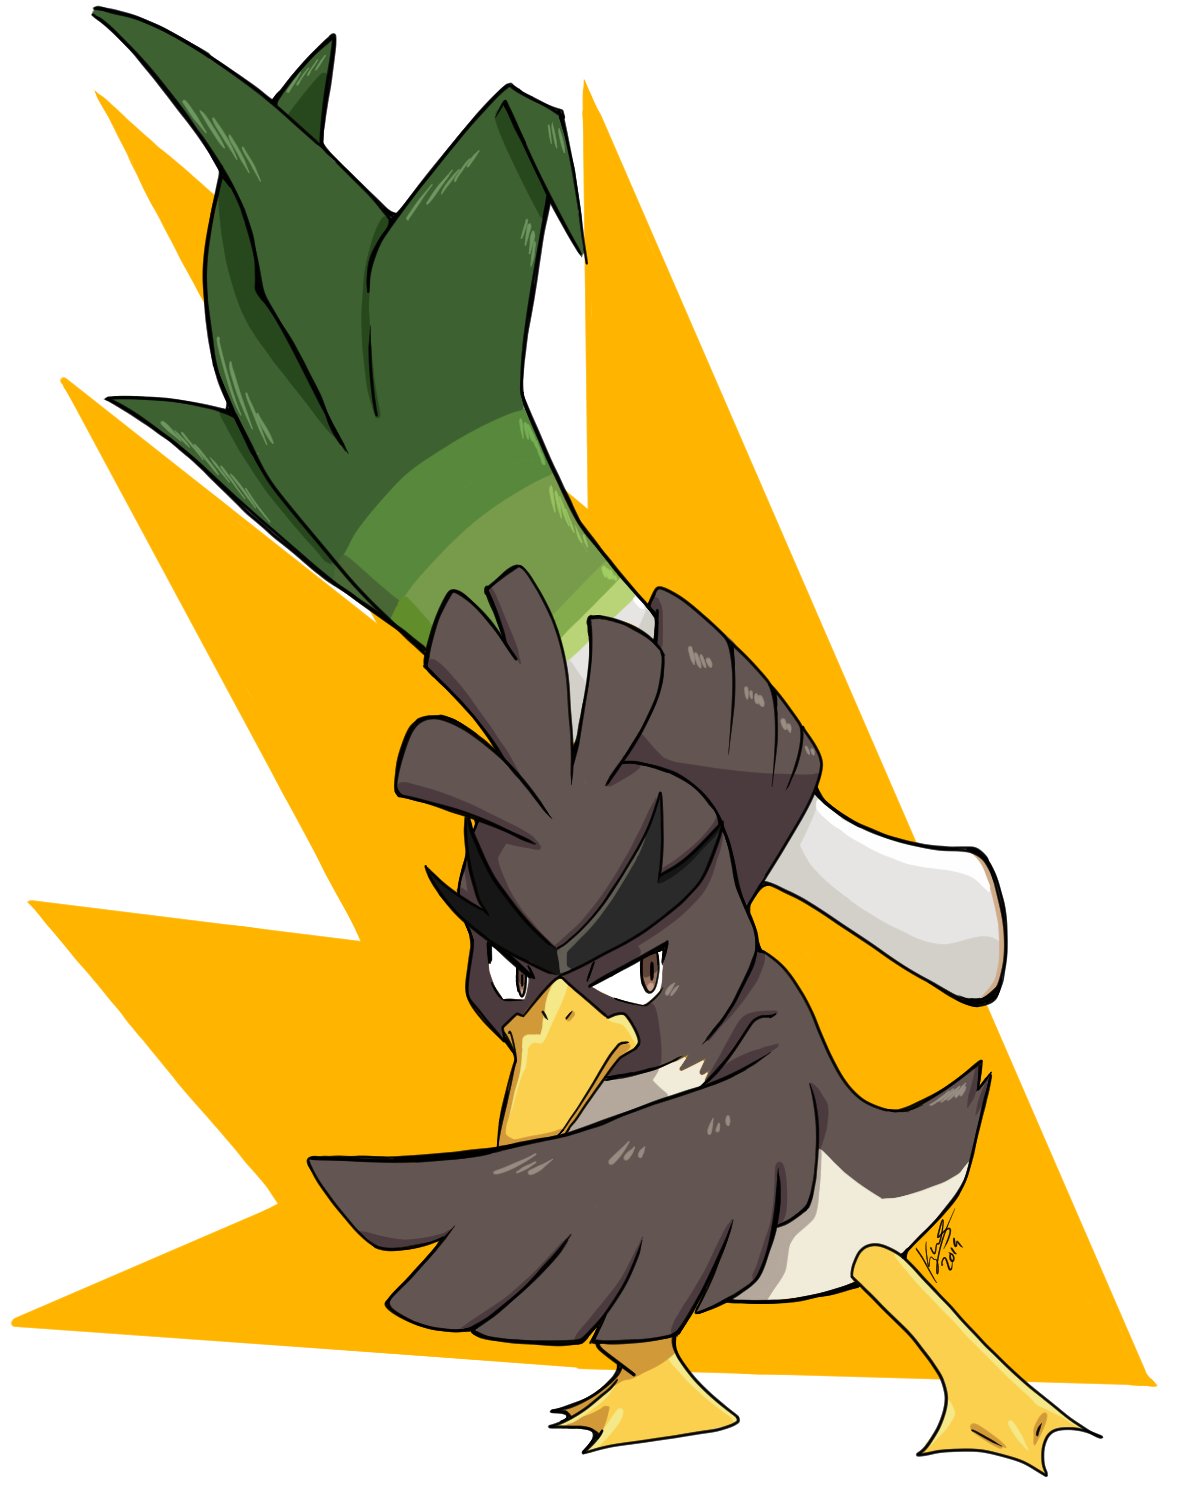 The Green Scorpion on X: 10. Galarian Farfetch'd They took one of the  biggest jokes from Gen I, one of the worst Pokemon in the franchise  AND MADE HIM A BADASS!!! I